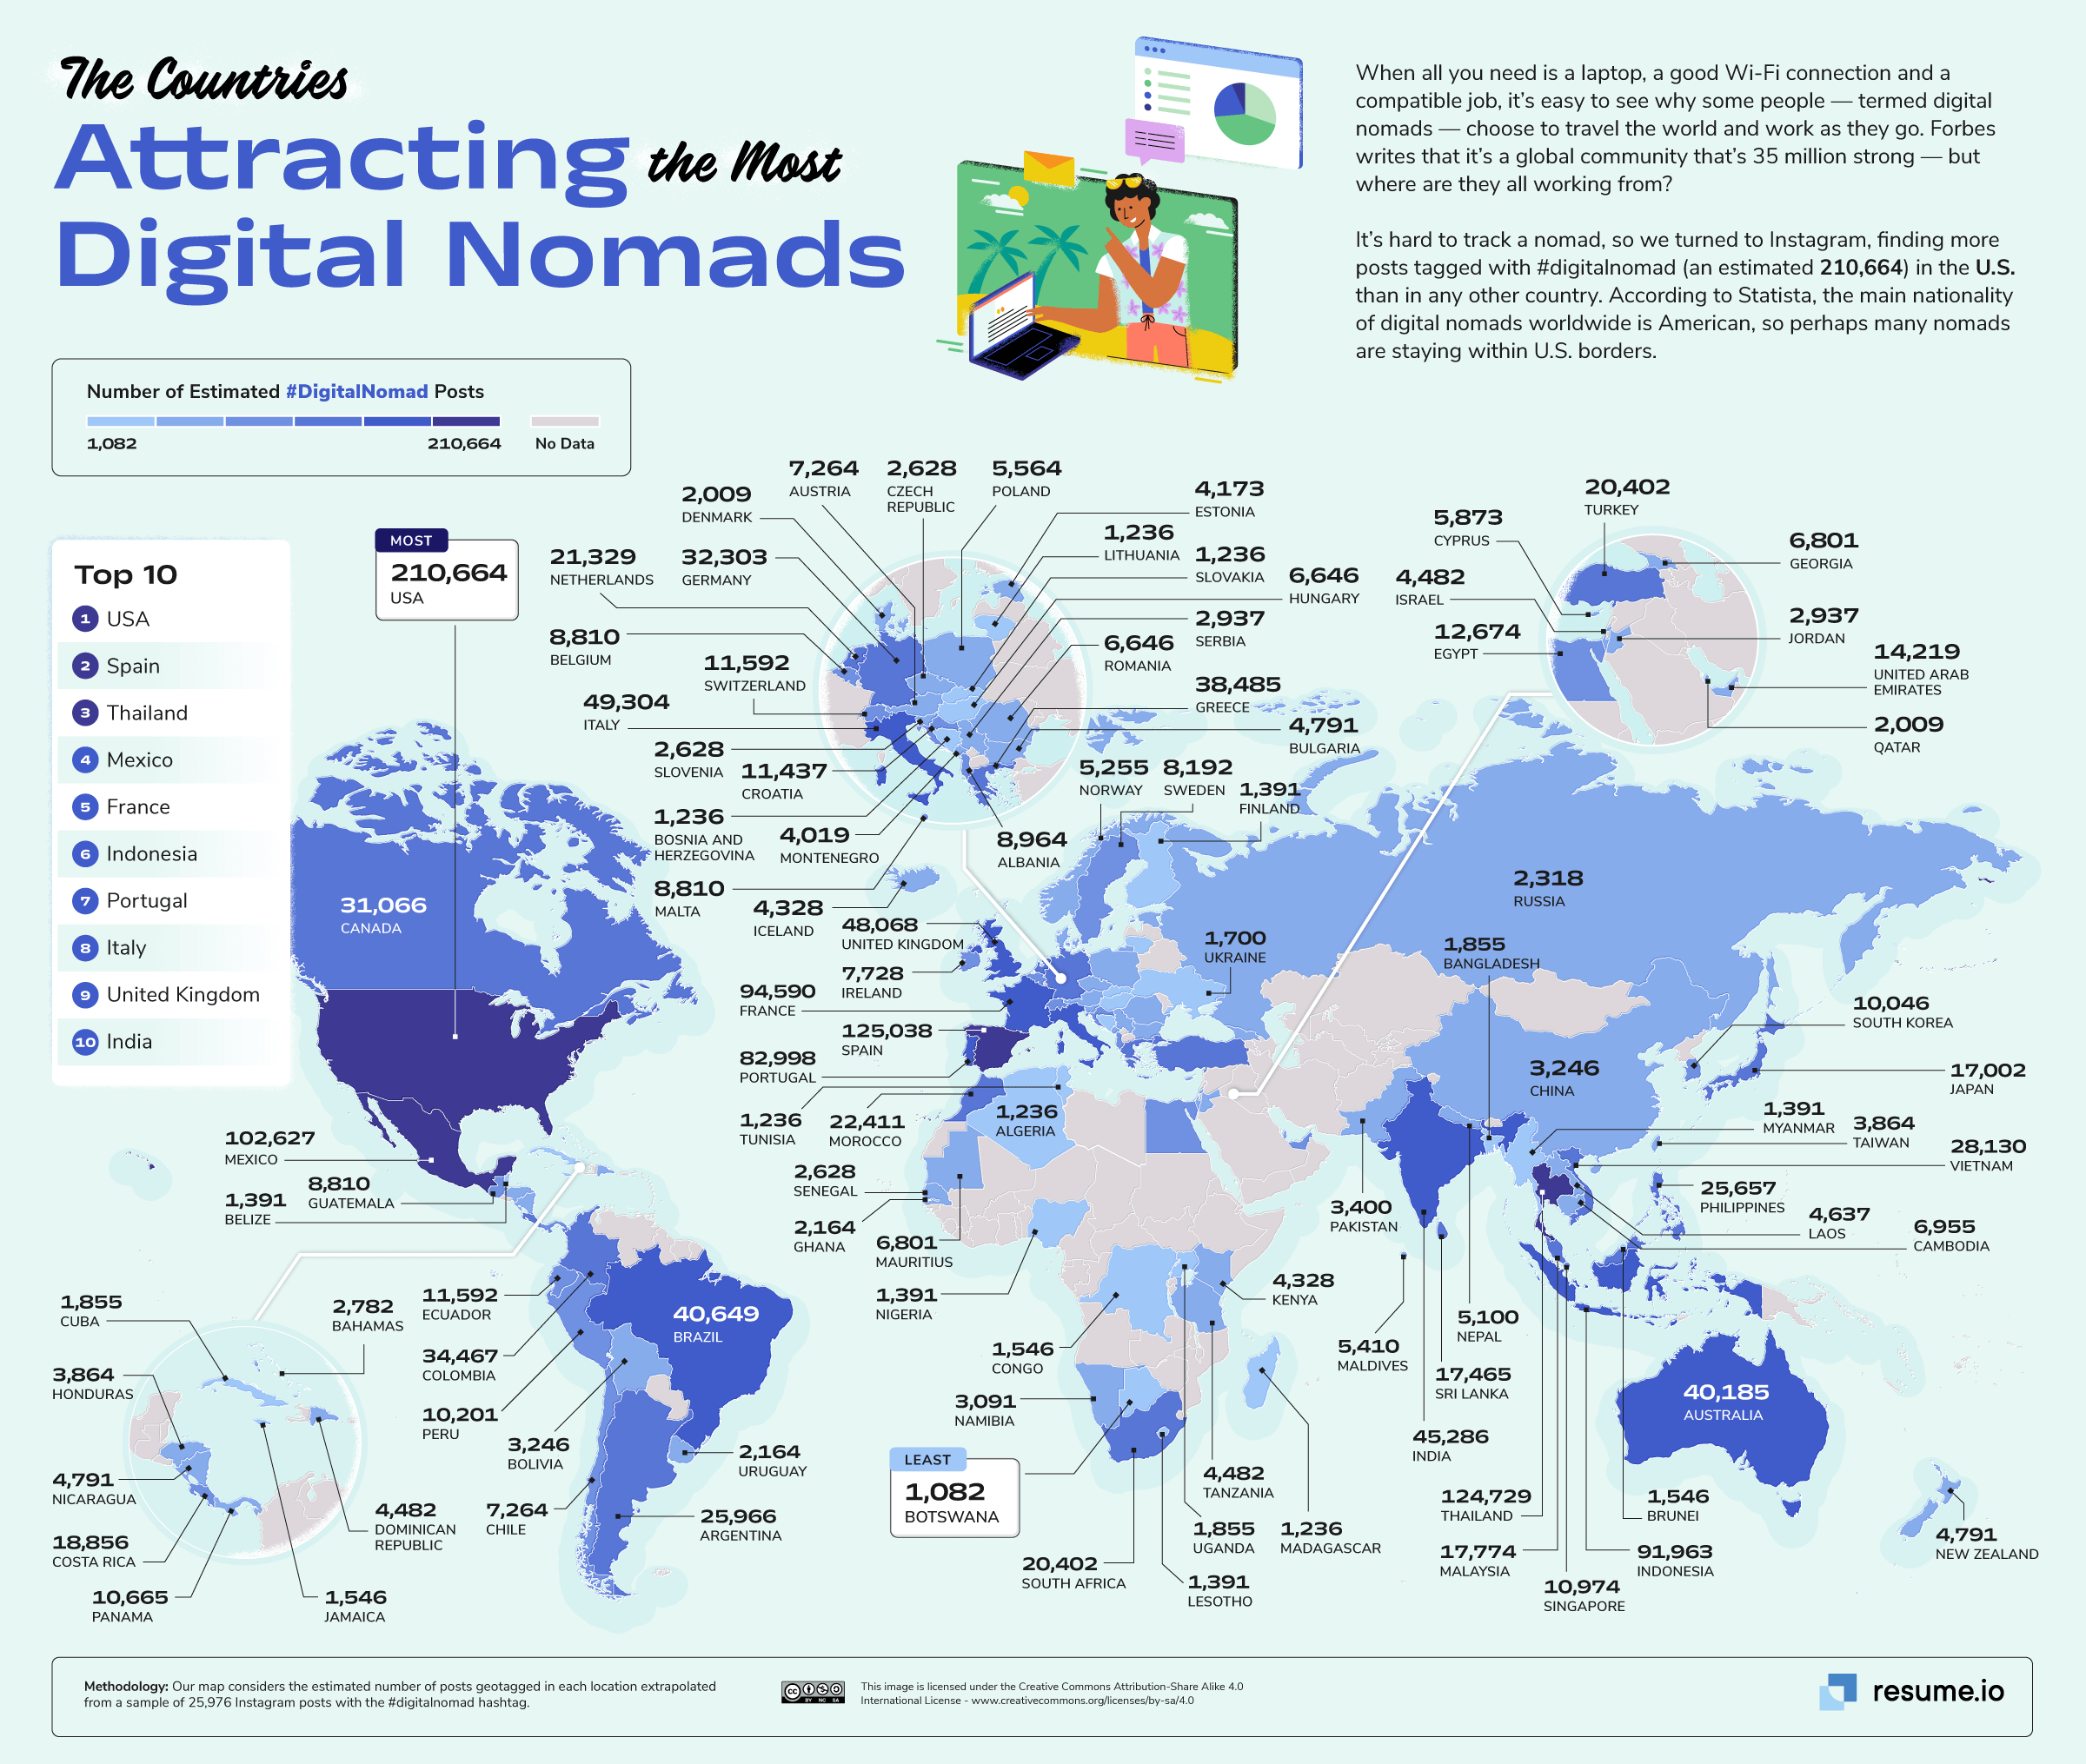 The most attracting countries for digital nomads